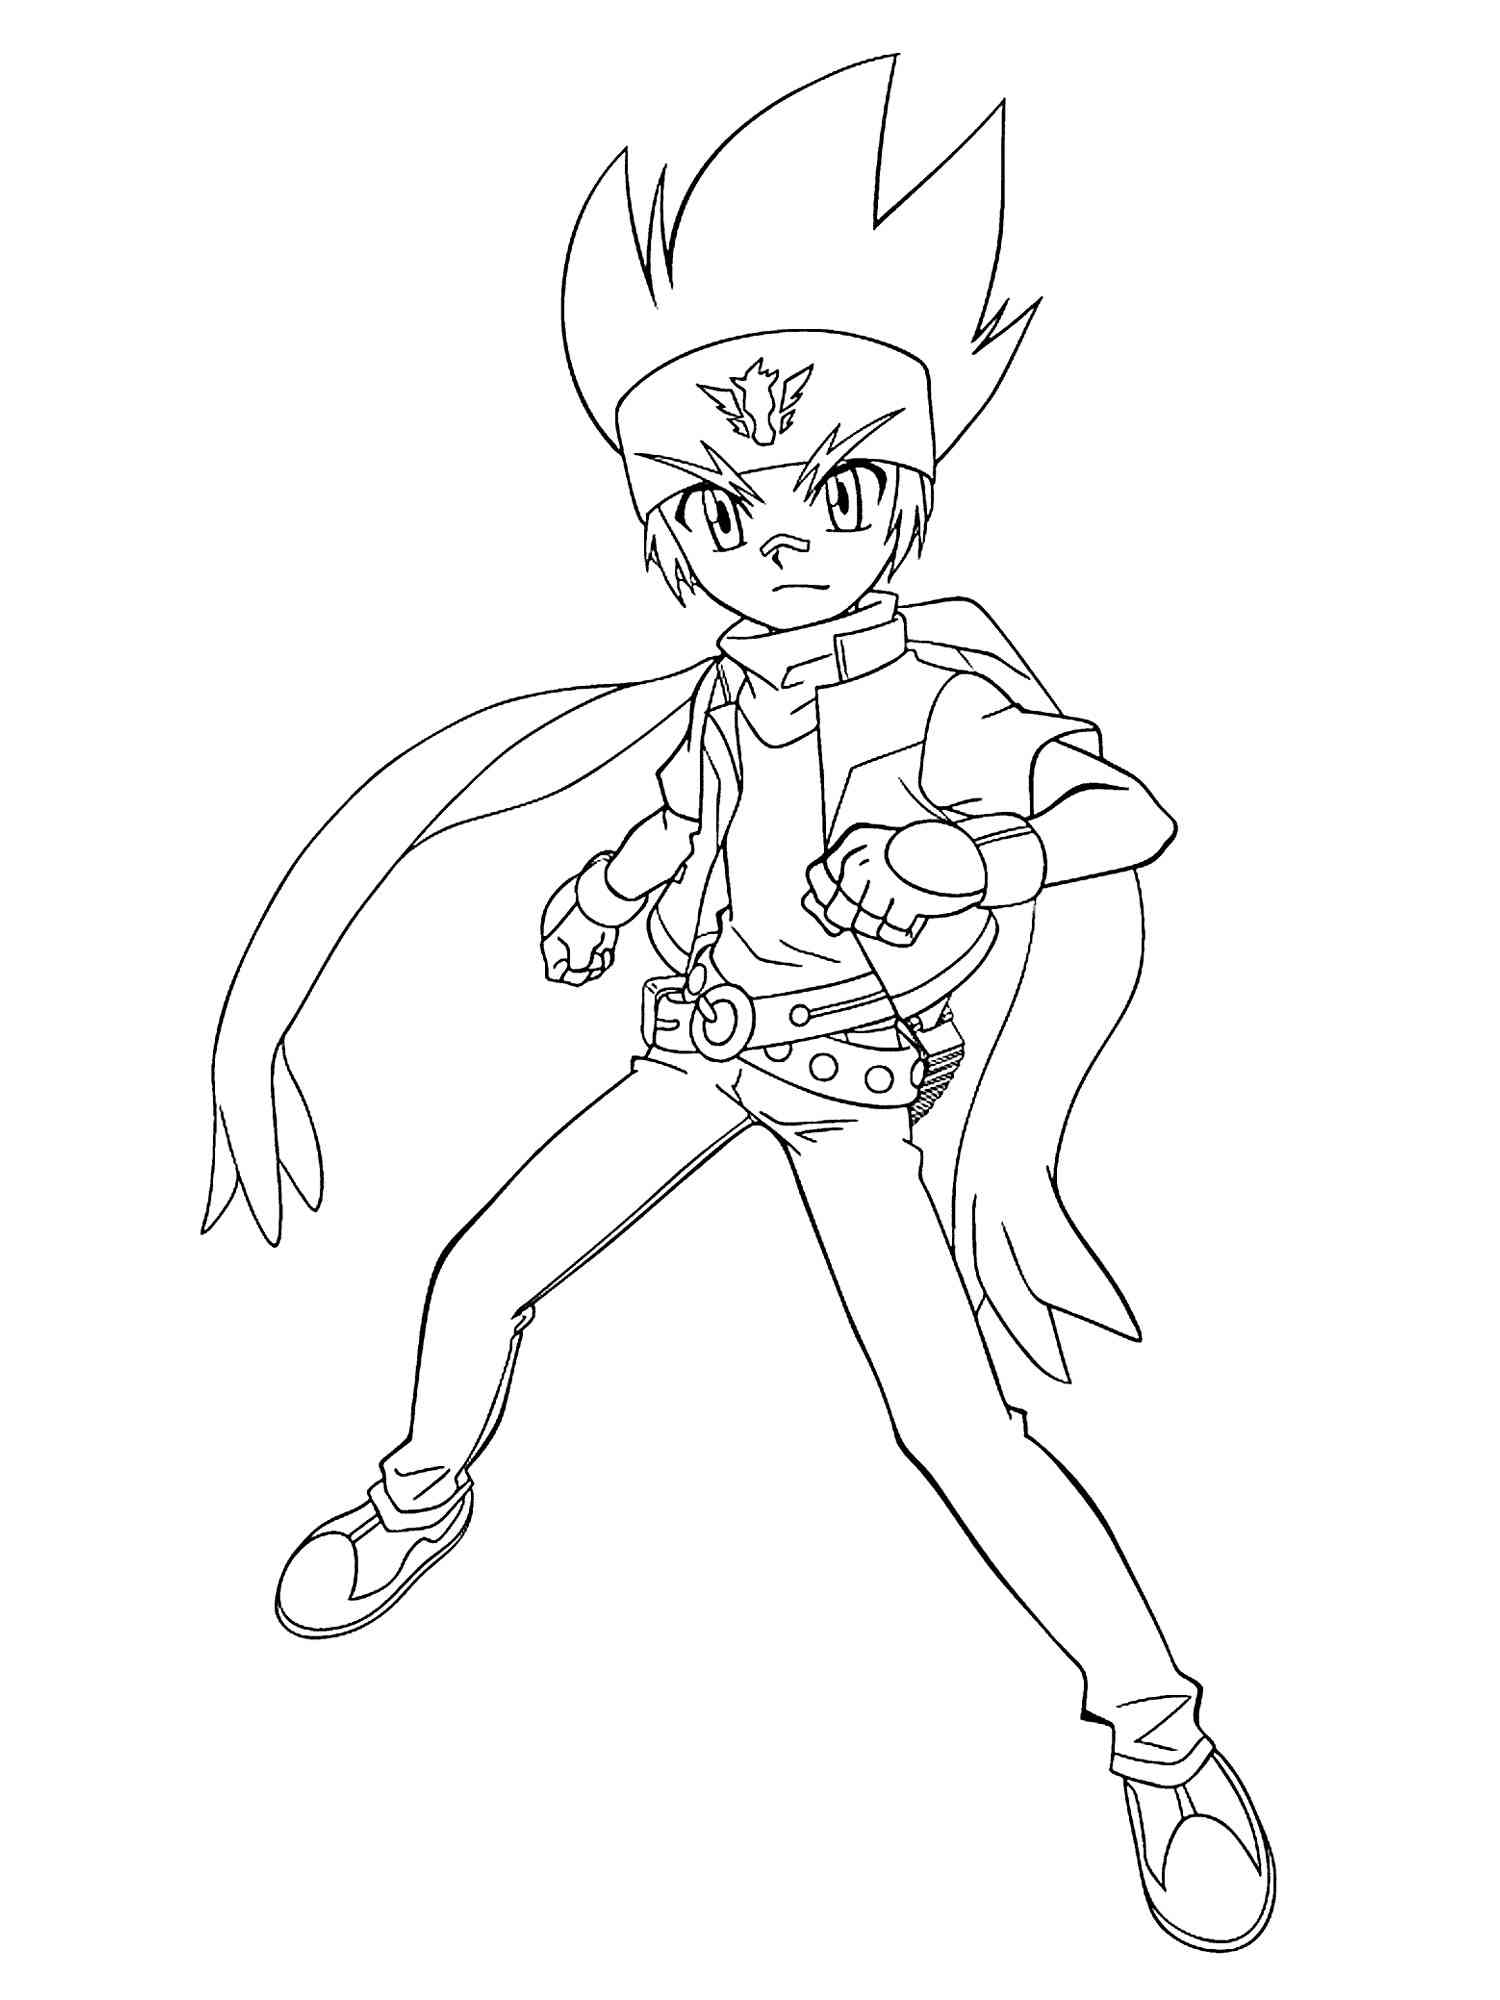 Beyblade coloring pages. Free Printable Beyblade coloring pages.